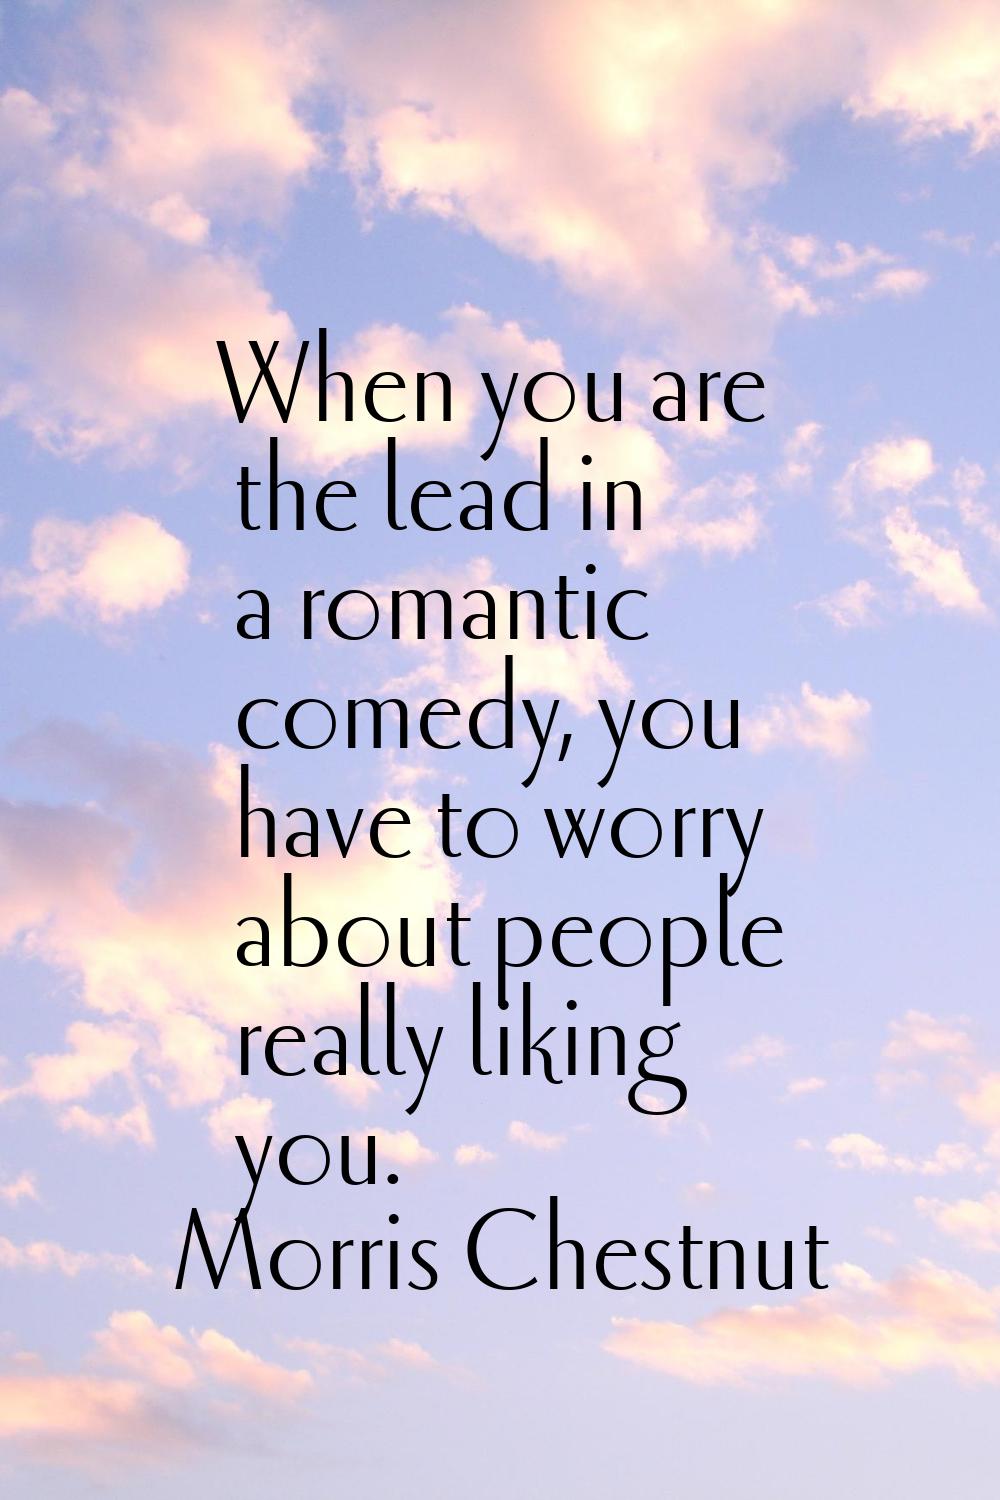 When you are the lead in a romantic comedy, you have to worry about people really liking you.